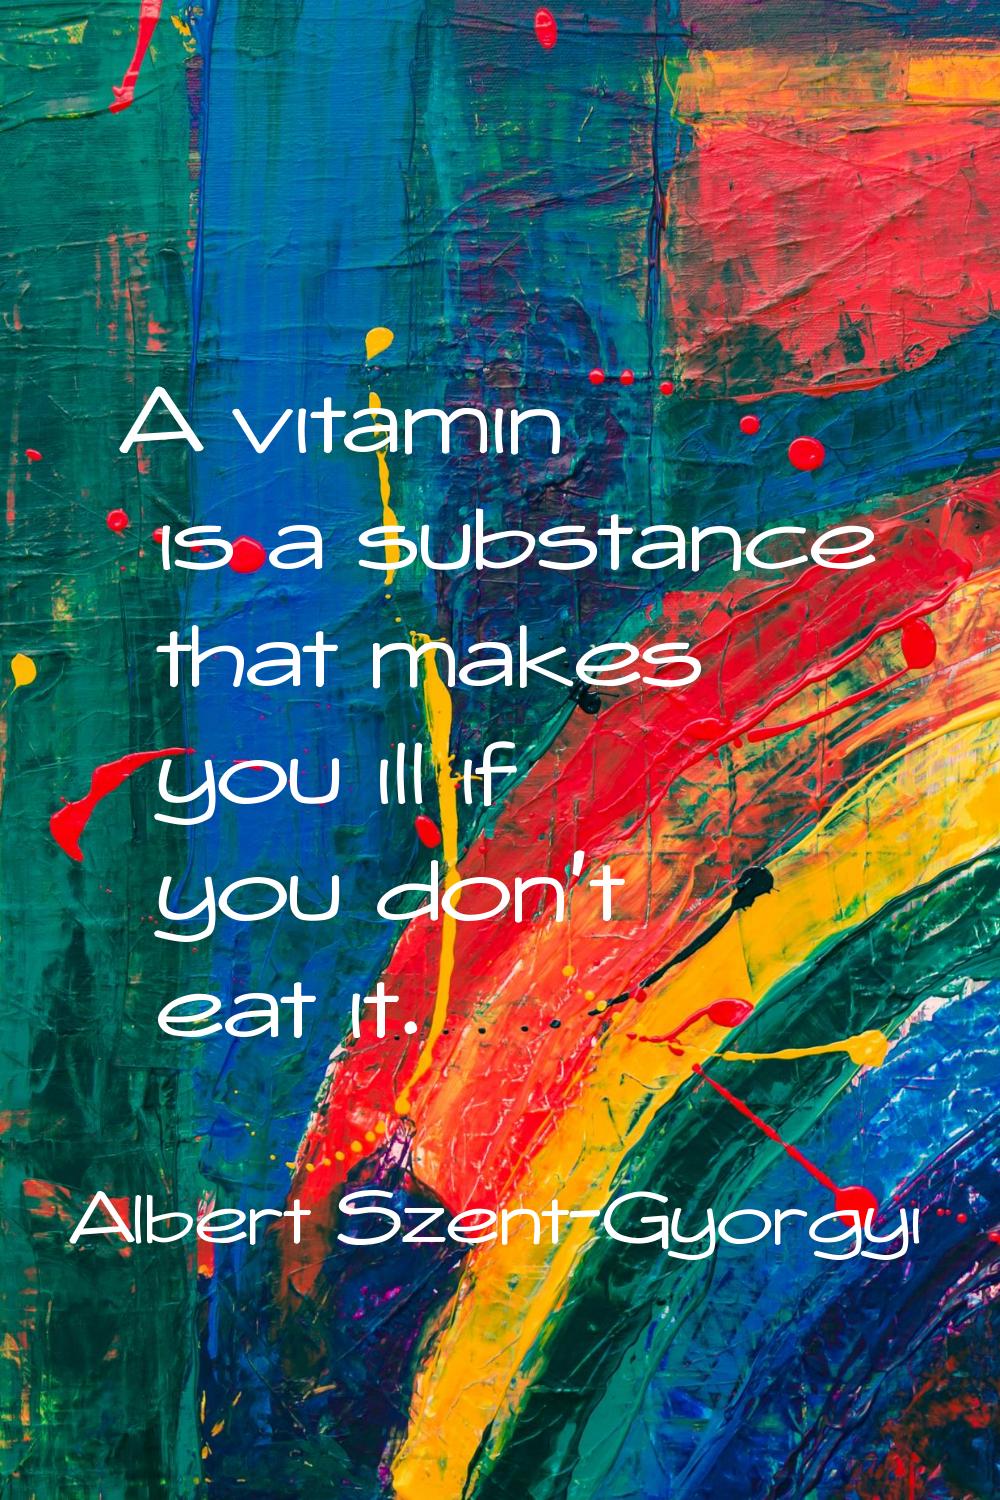 A vitamin is a substance that makes you ill if you don't eat it.